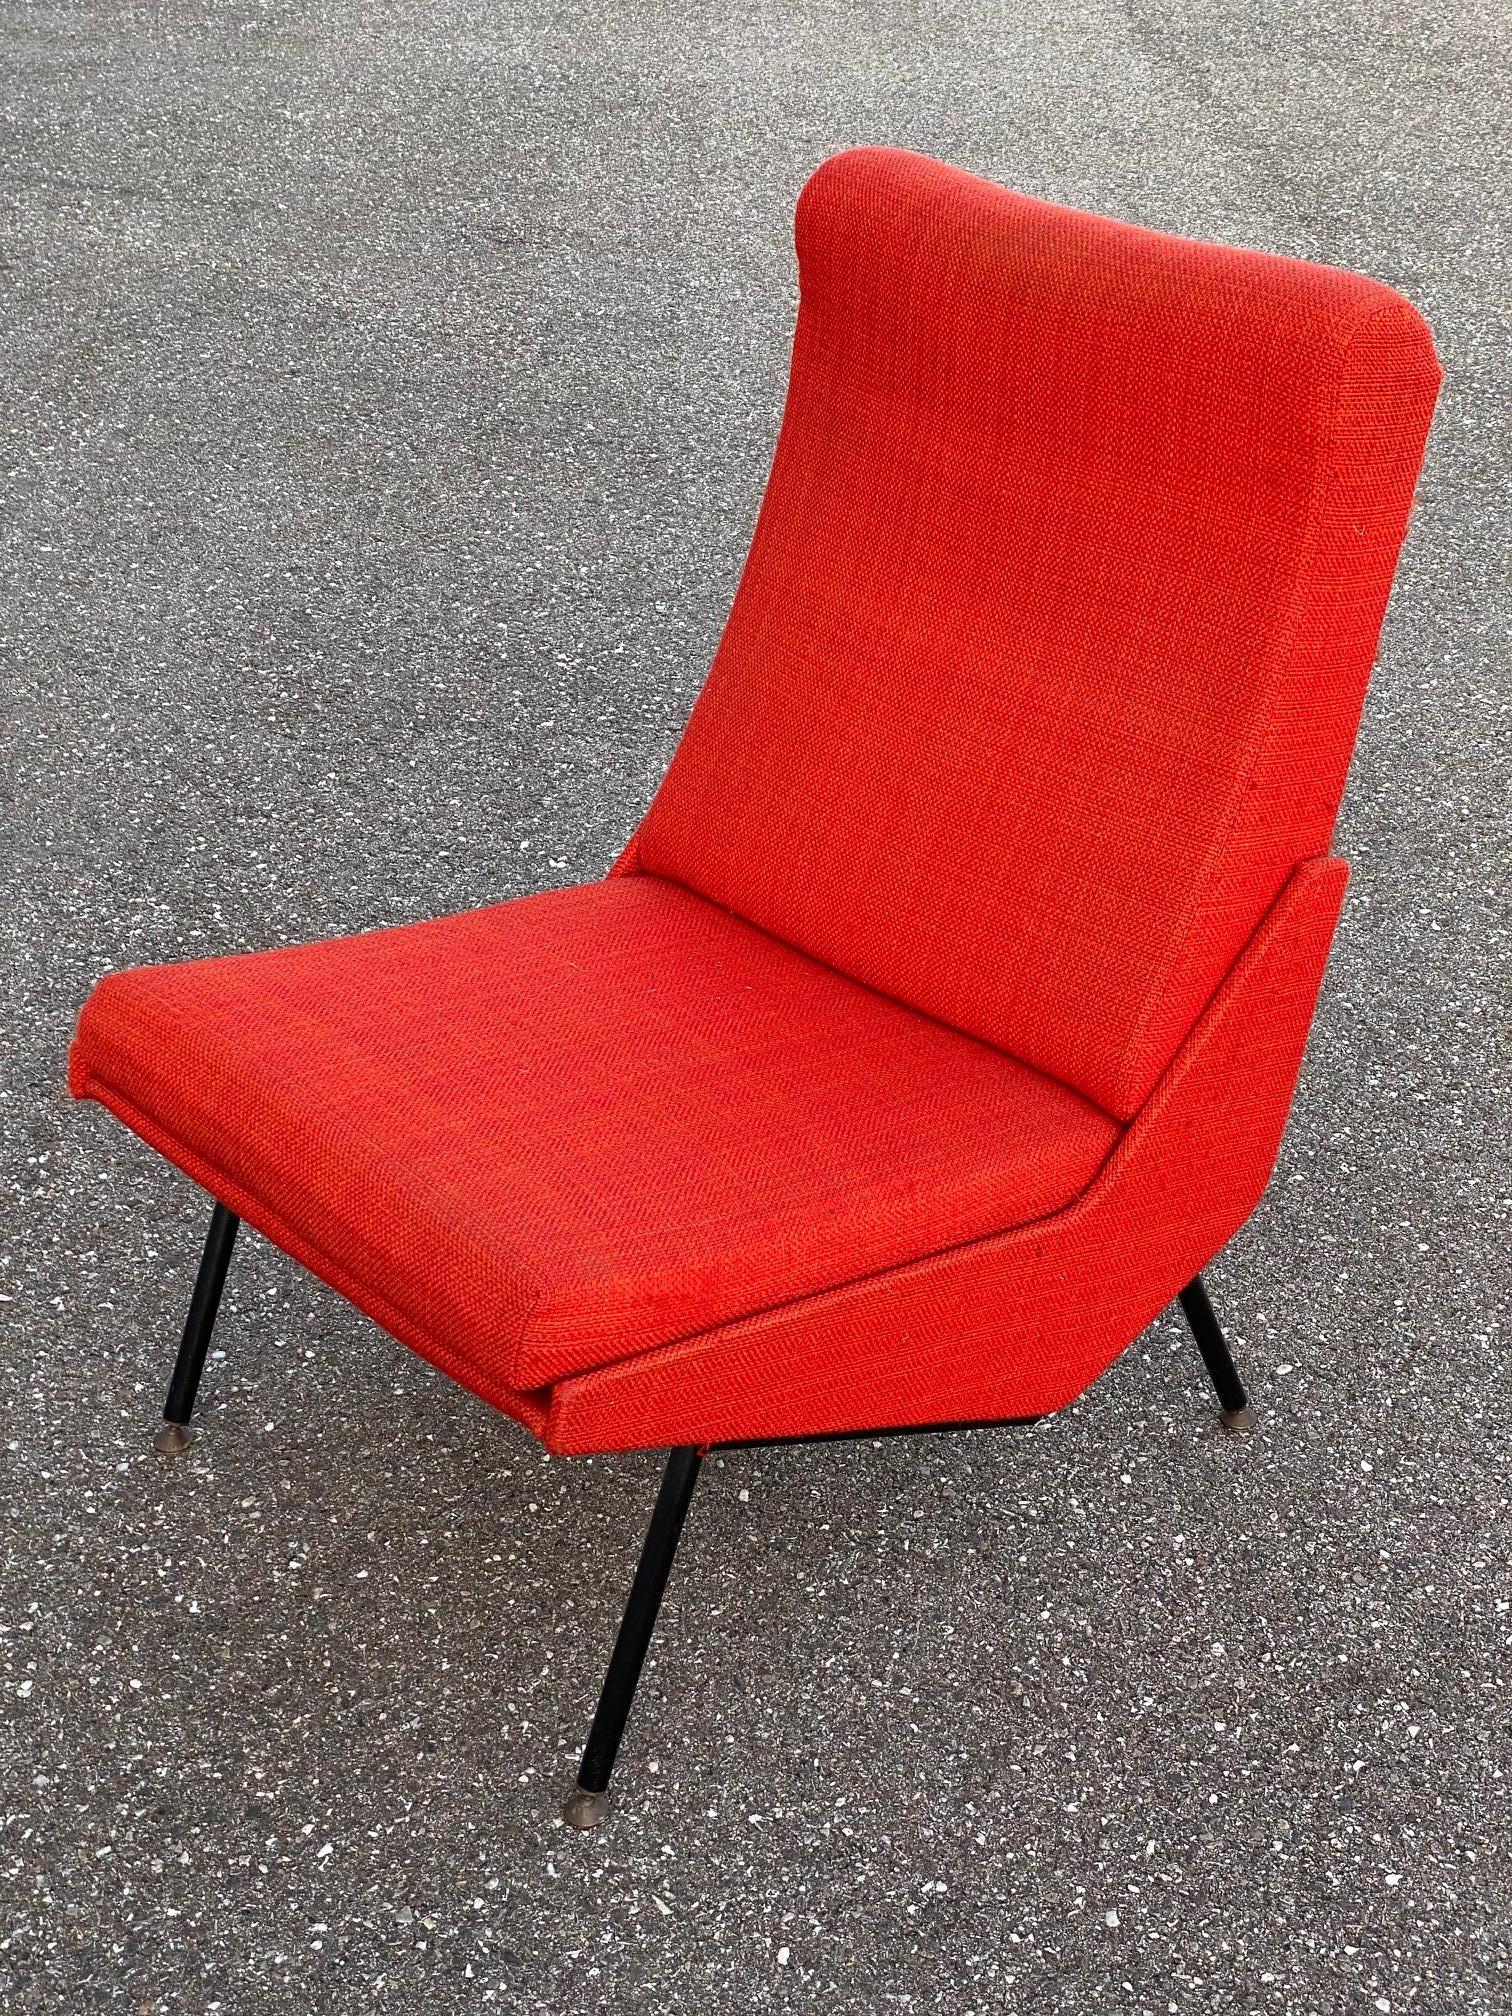 Troika chair designed by Pierre Guariche in the 1960's for Airborne 
Chair in original condition, red wool fabric upholstery.